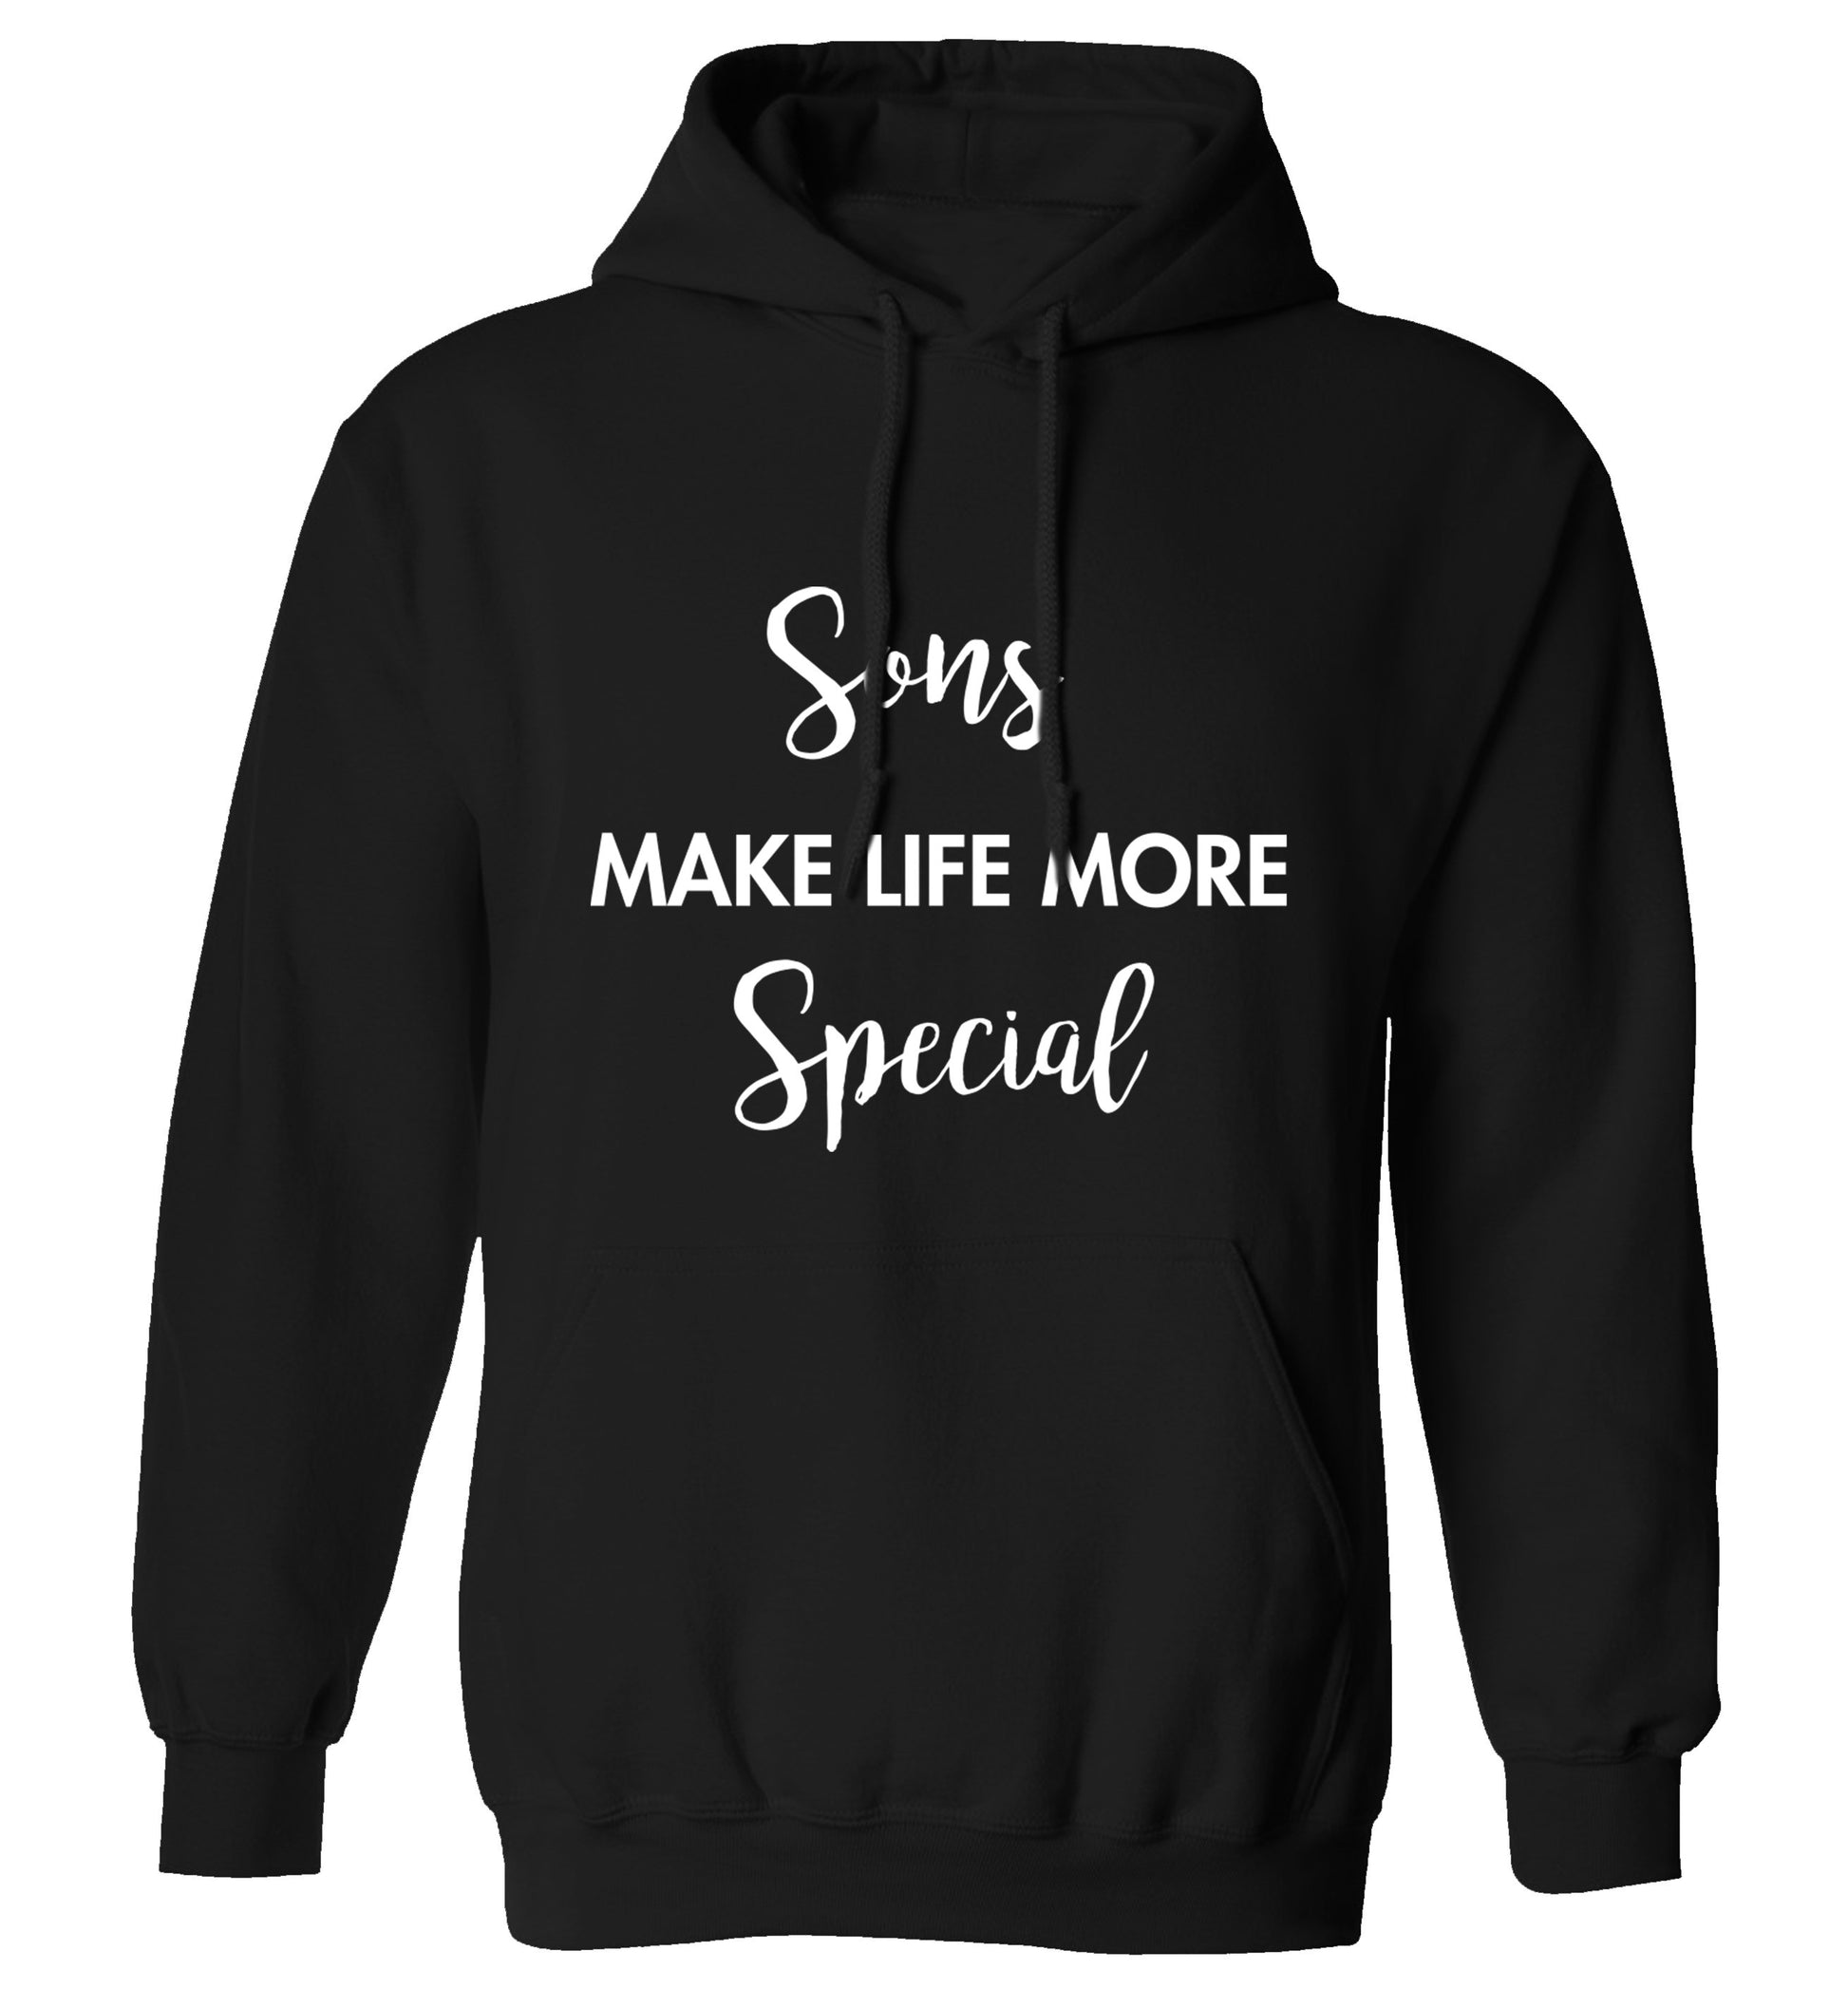 Daughters make life more special adults unisex black hoodie 2XL